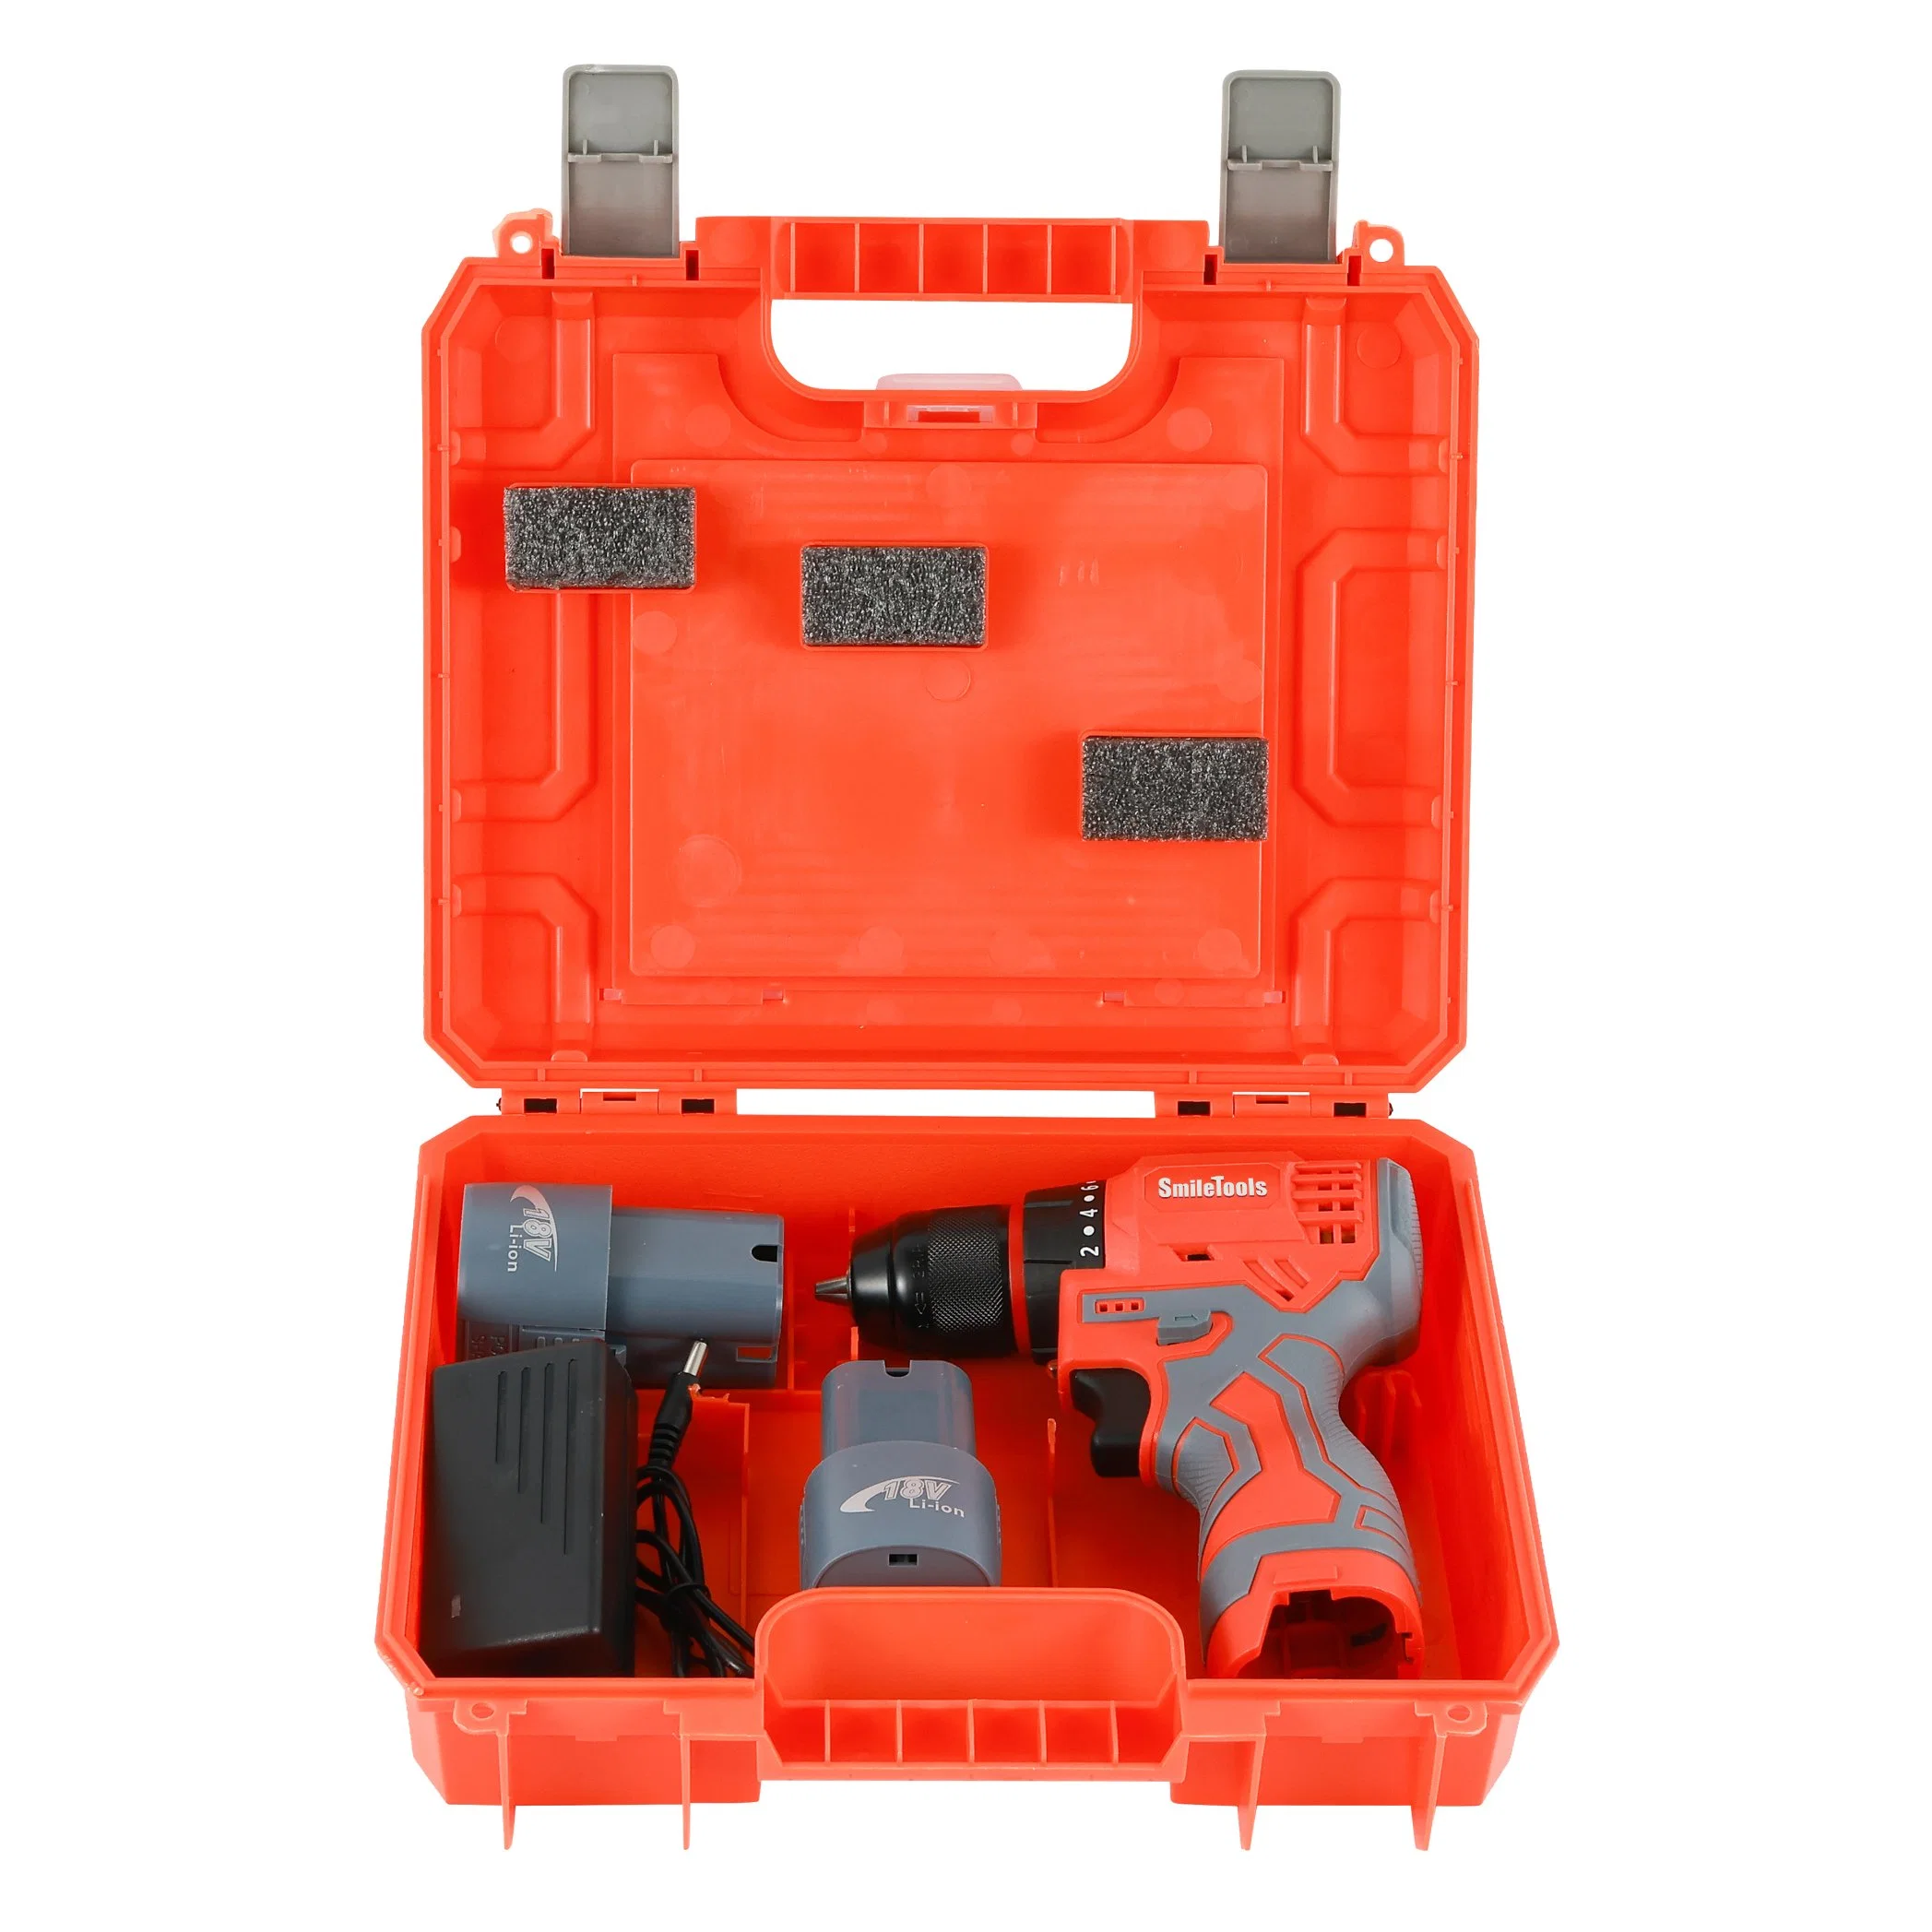 Premium 750W Portable Powerful Hammer Drill Professional Power Tools for Heavier Work